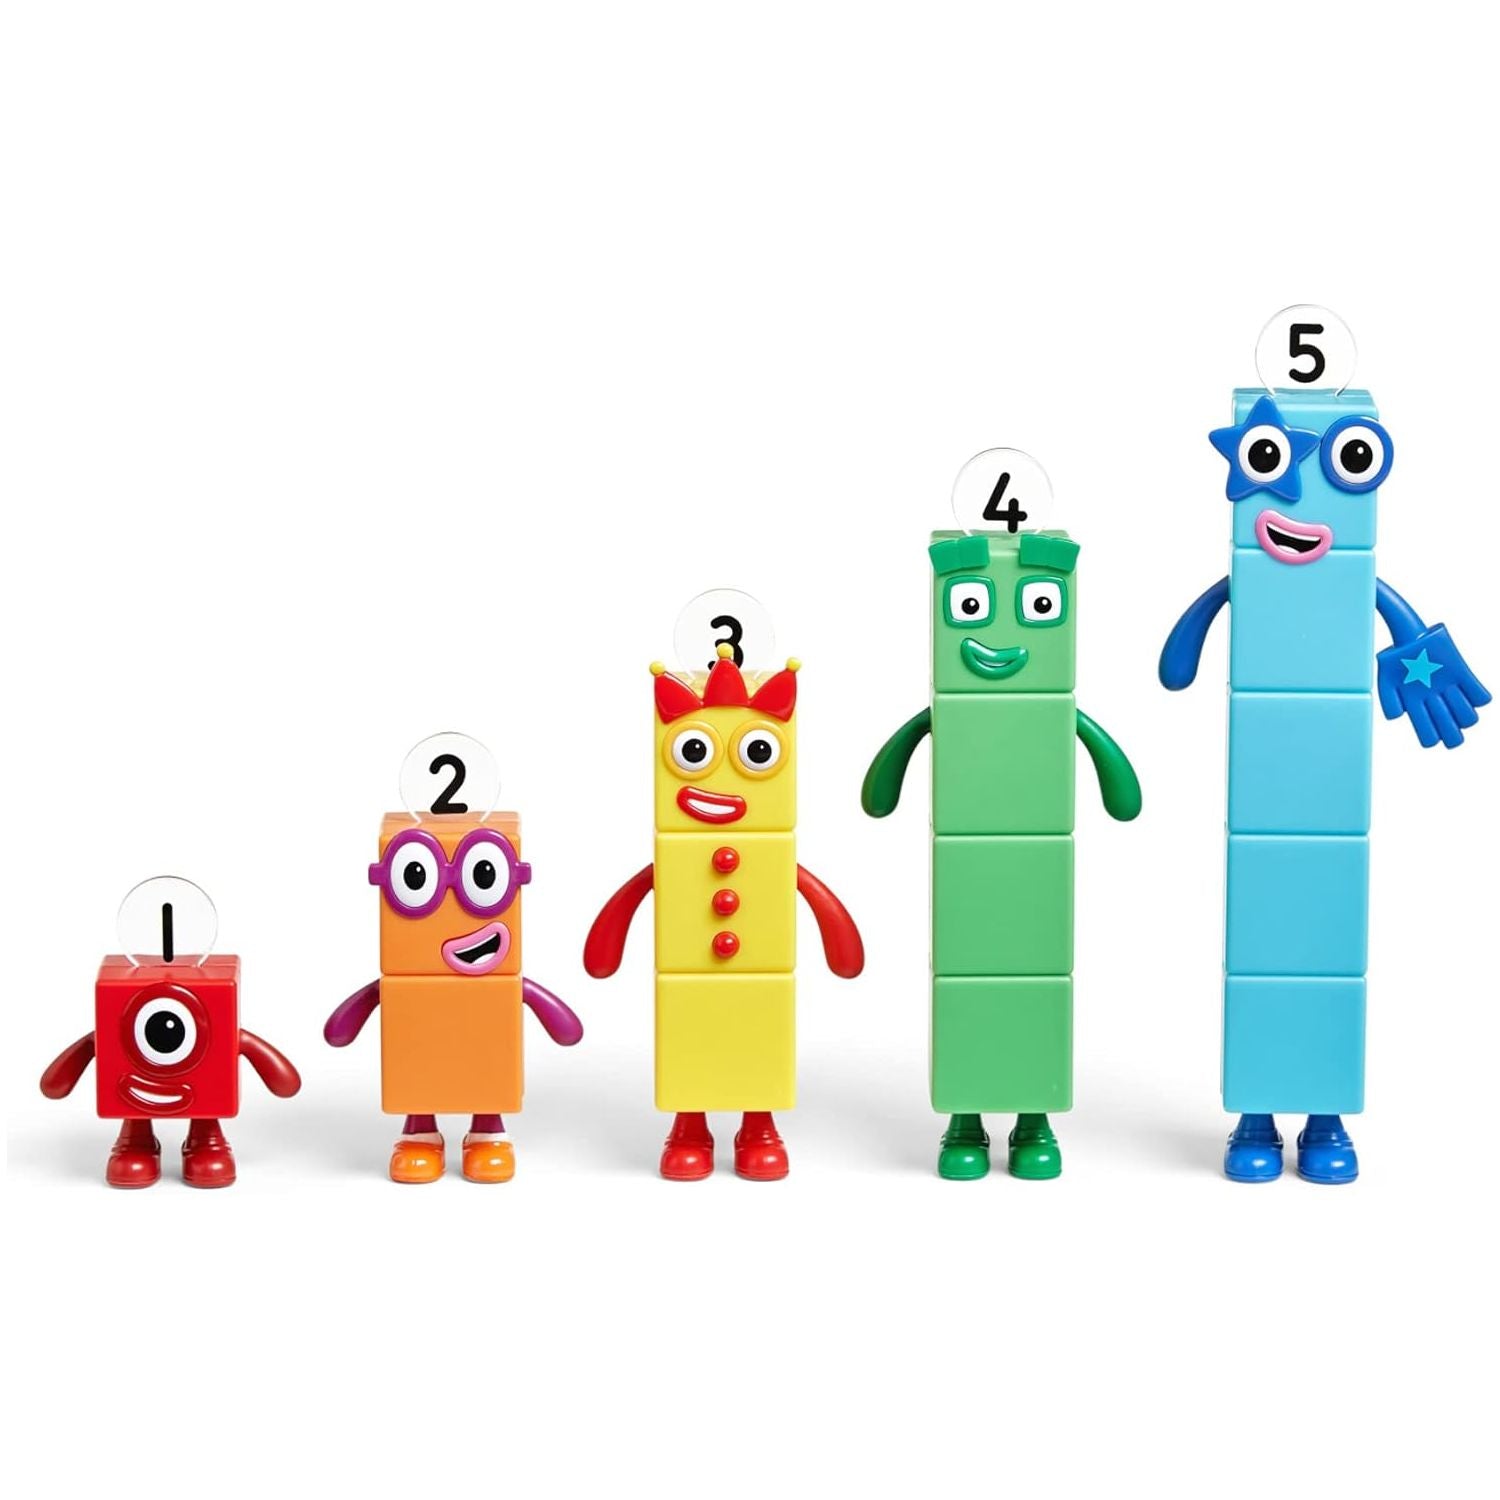 Numberblocks Friends One to Five Learning Resources